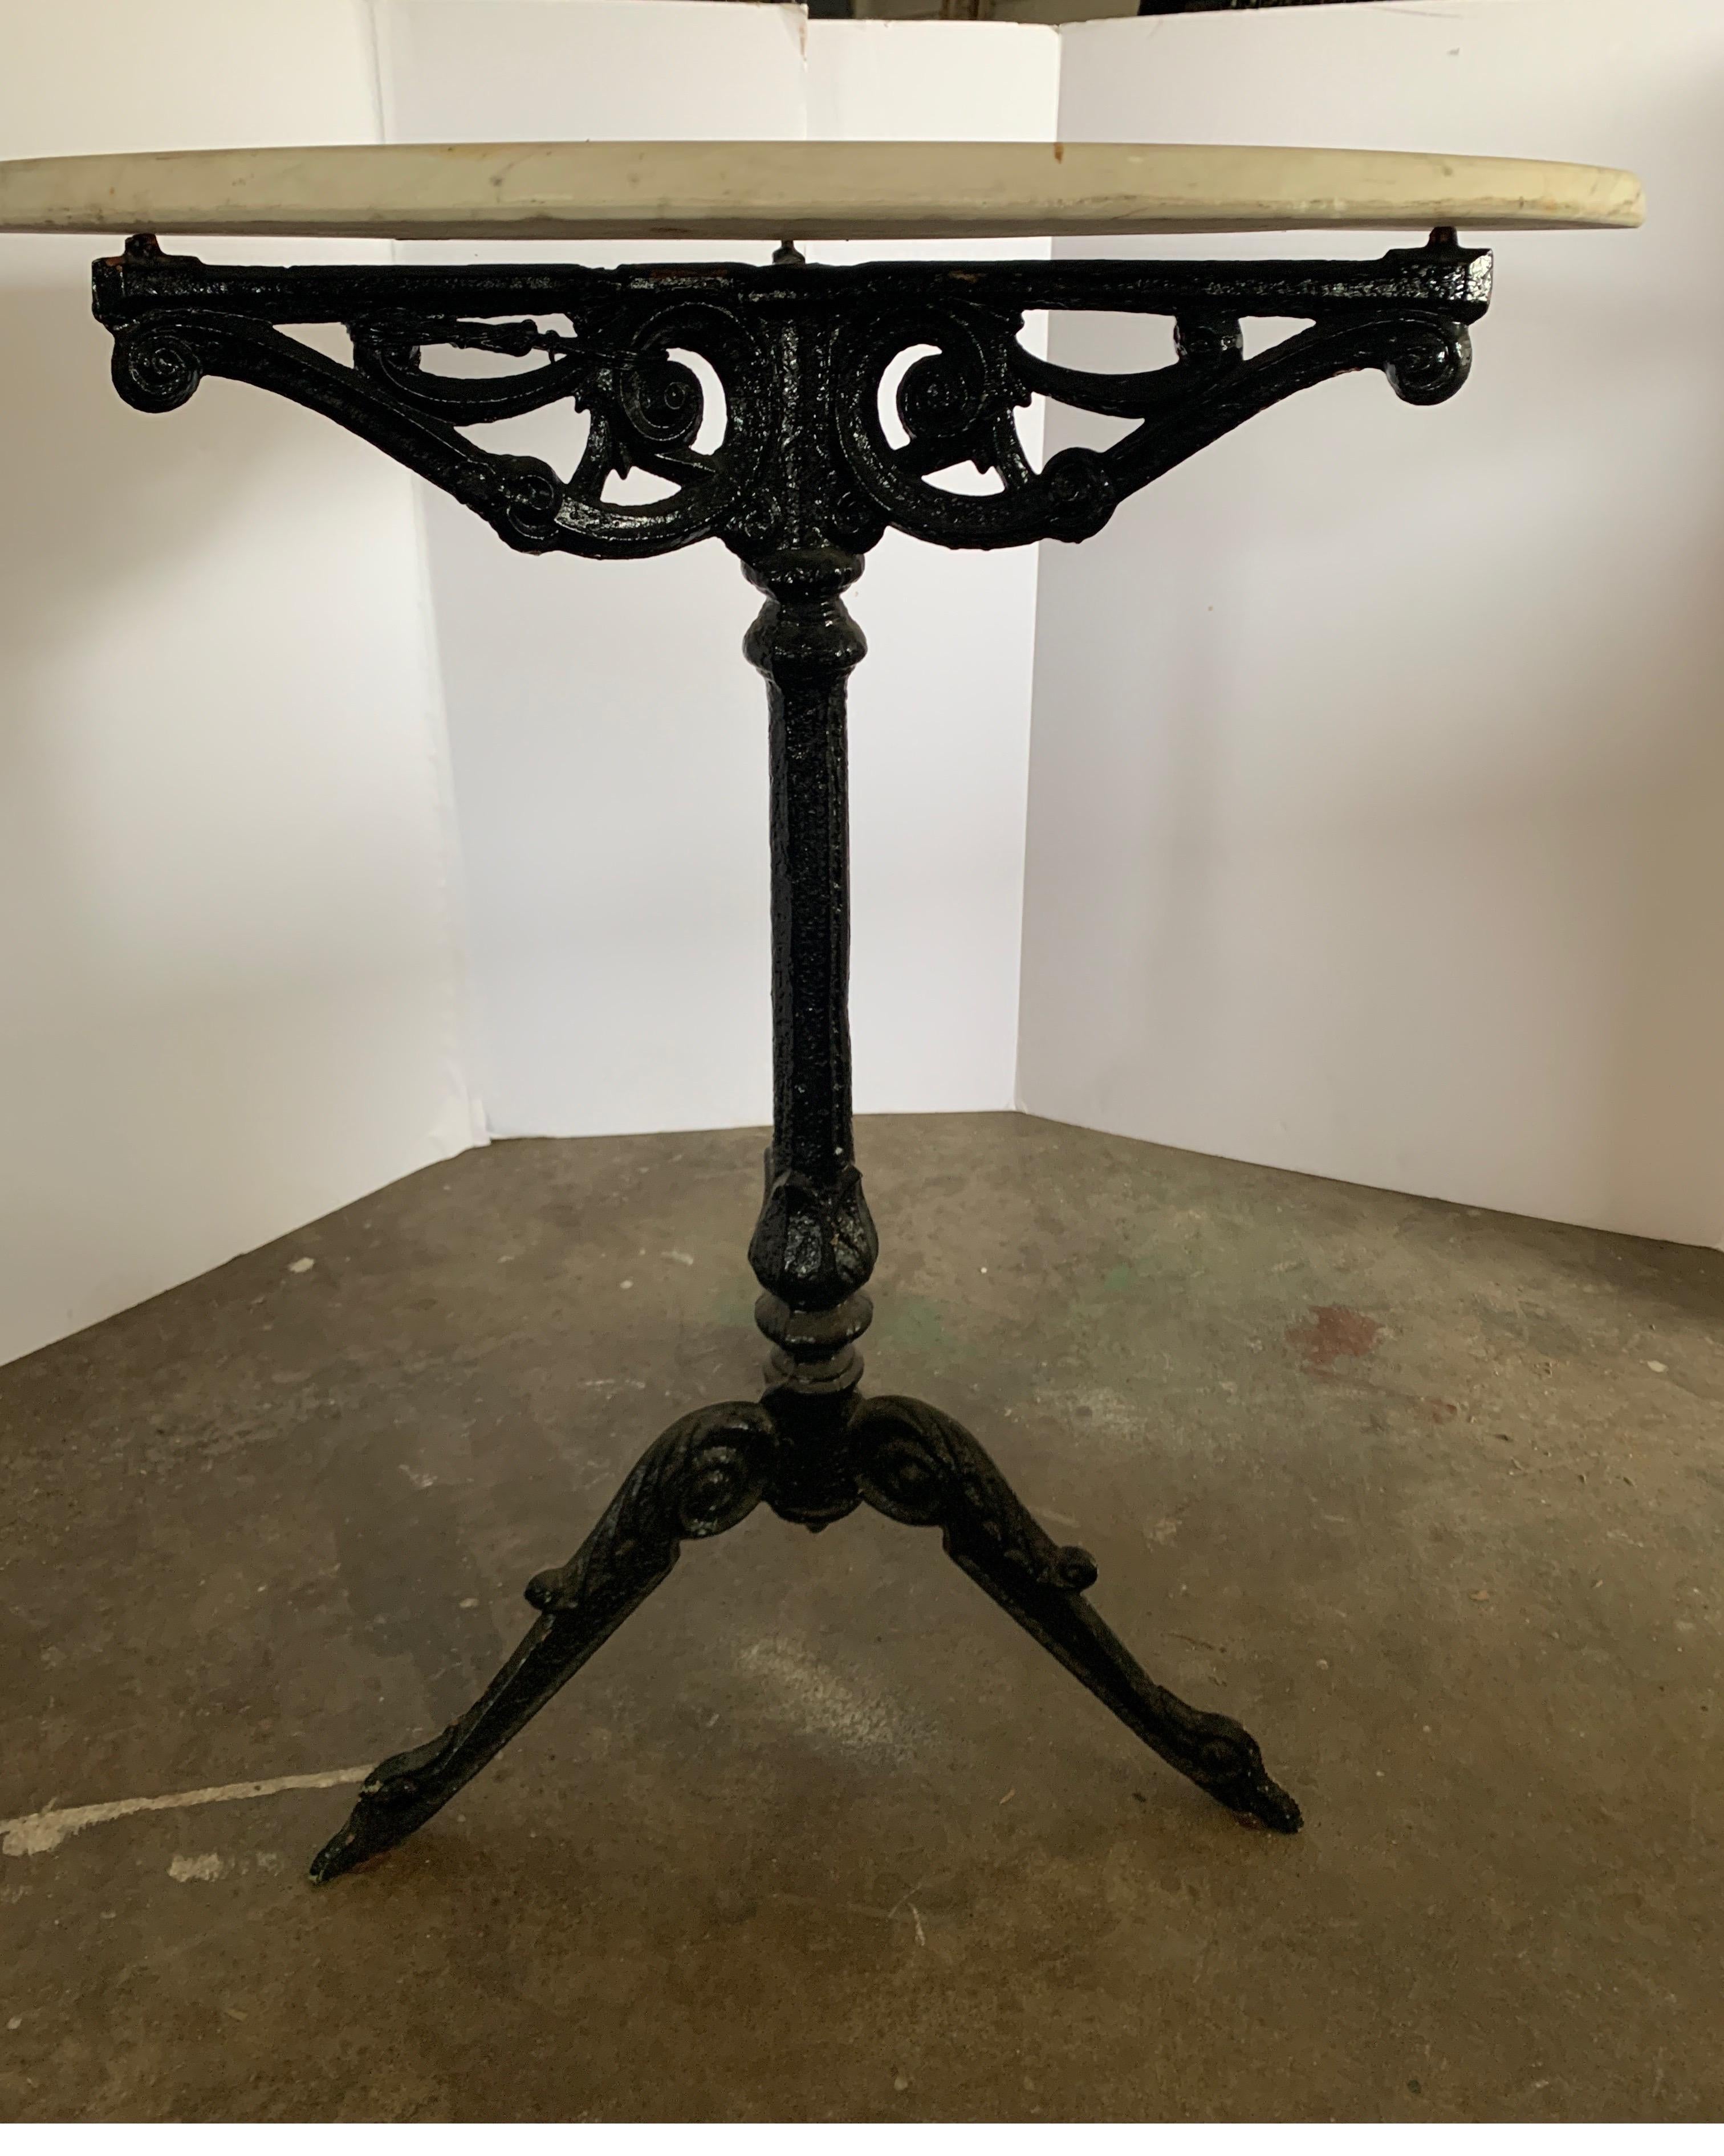 This is the typical bistro table used in restaurants throughout Europe. This one has the original white aged marble top and the base has been painted over to a shiny black. It is in great condition free of rust.